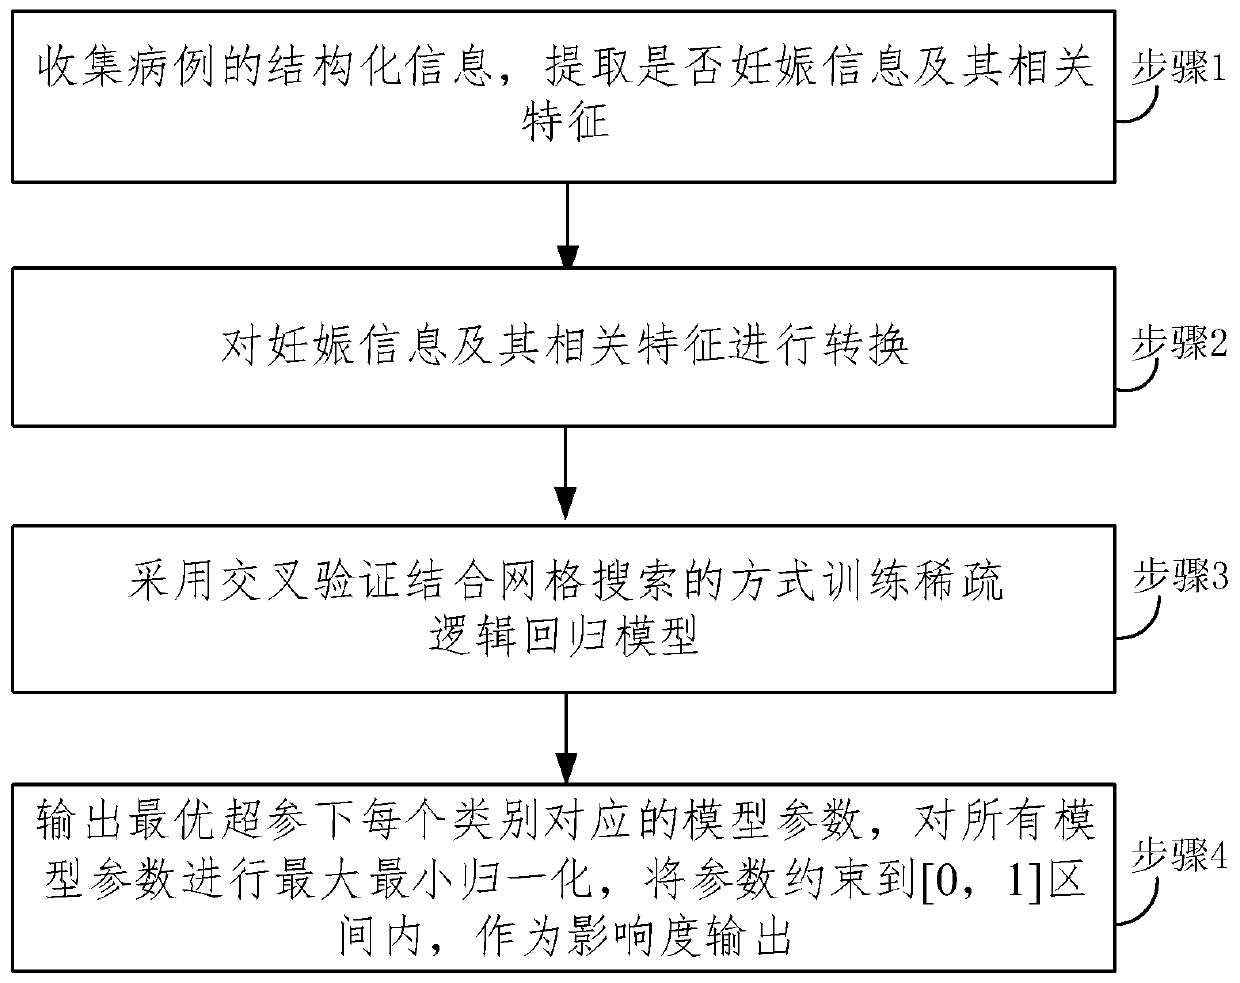 Artificial insemination success rate influence factor calculating method based on logistic regression and system thereof